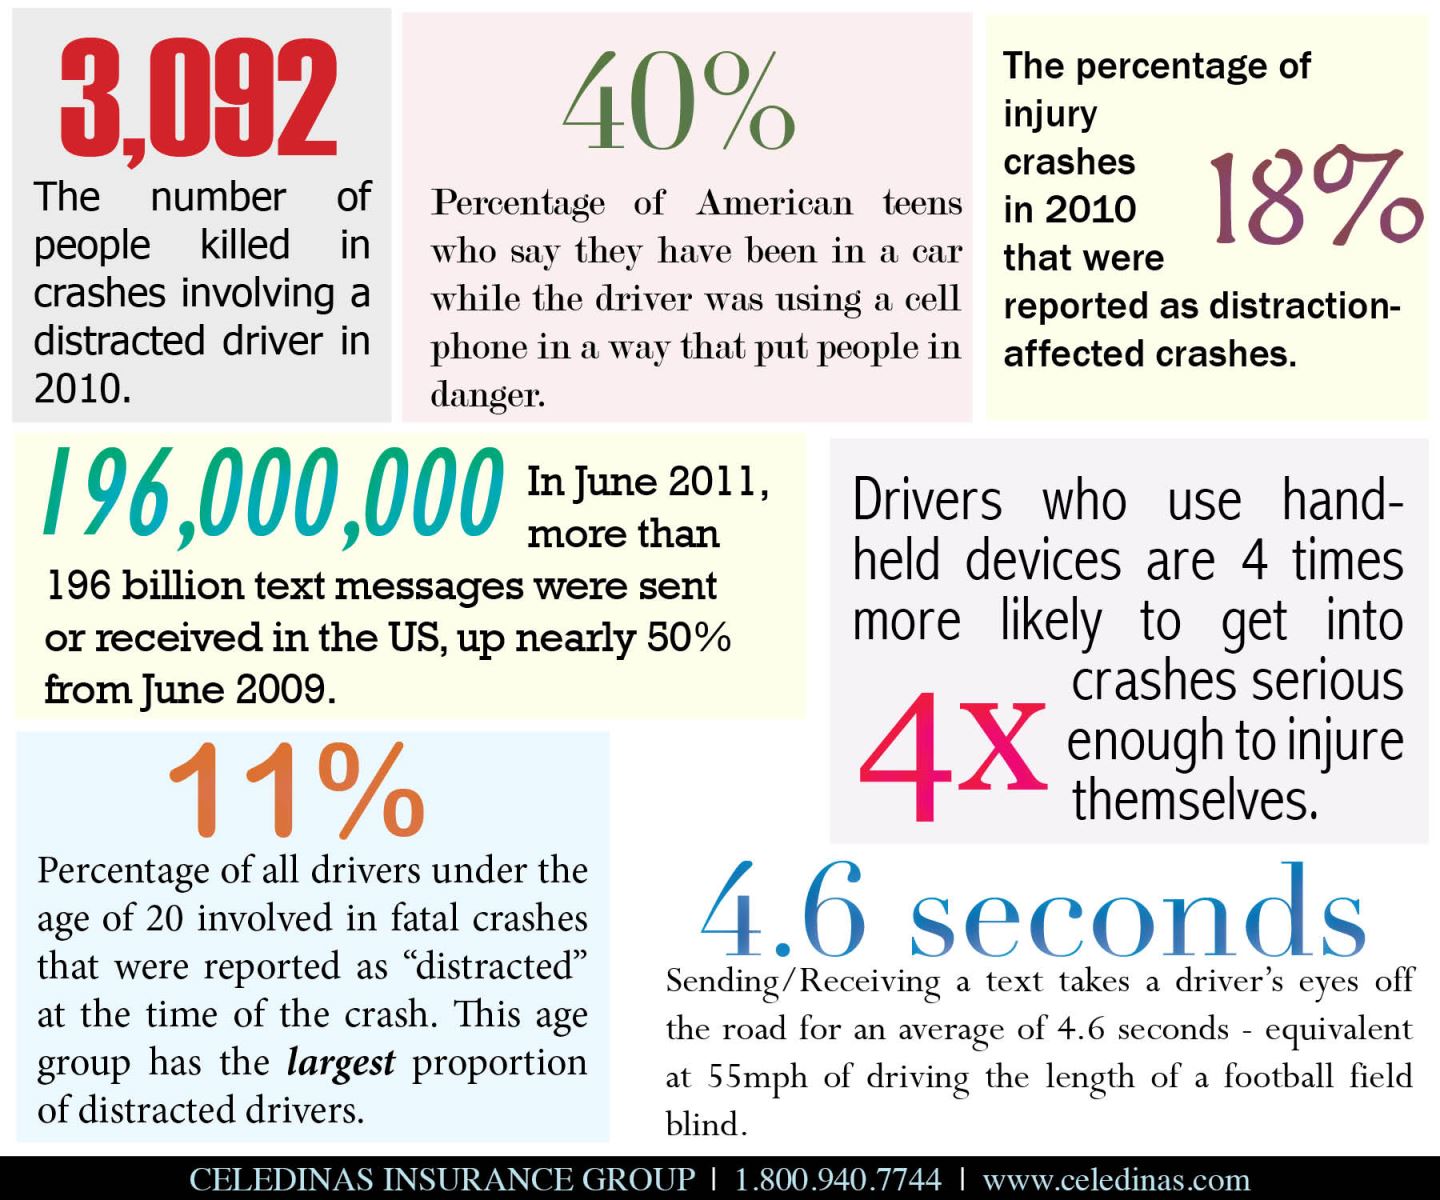 Distracted Driving: Why You Should Not Risk It